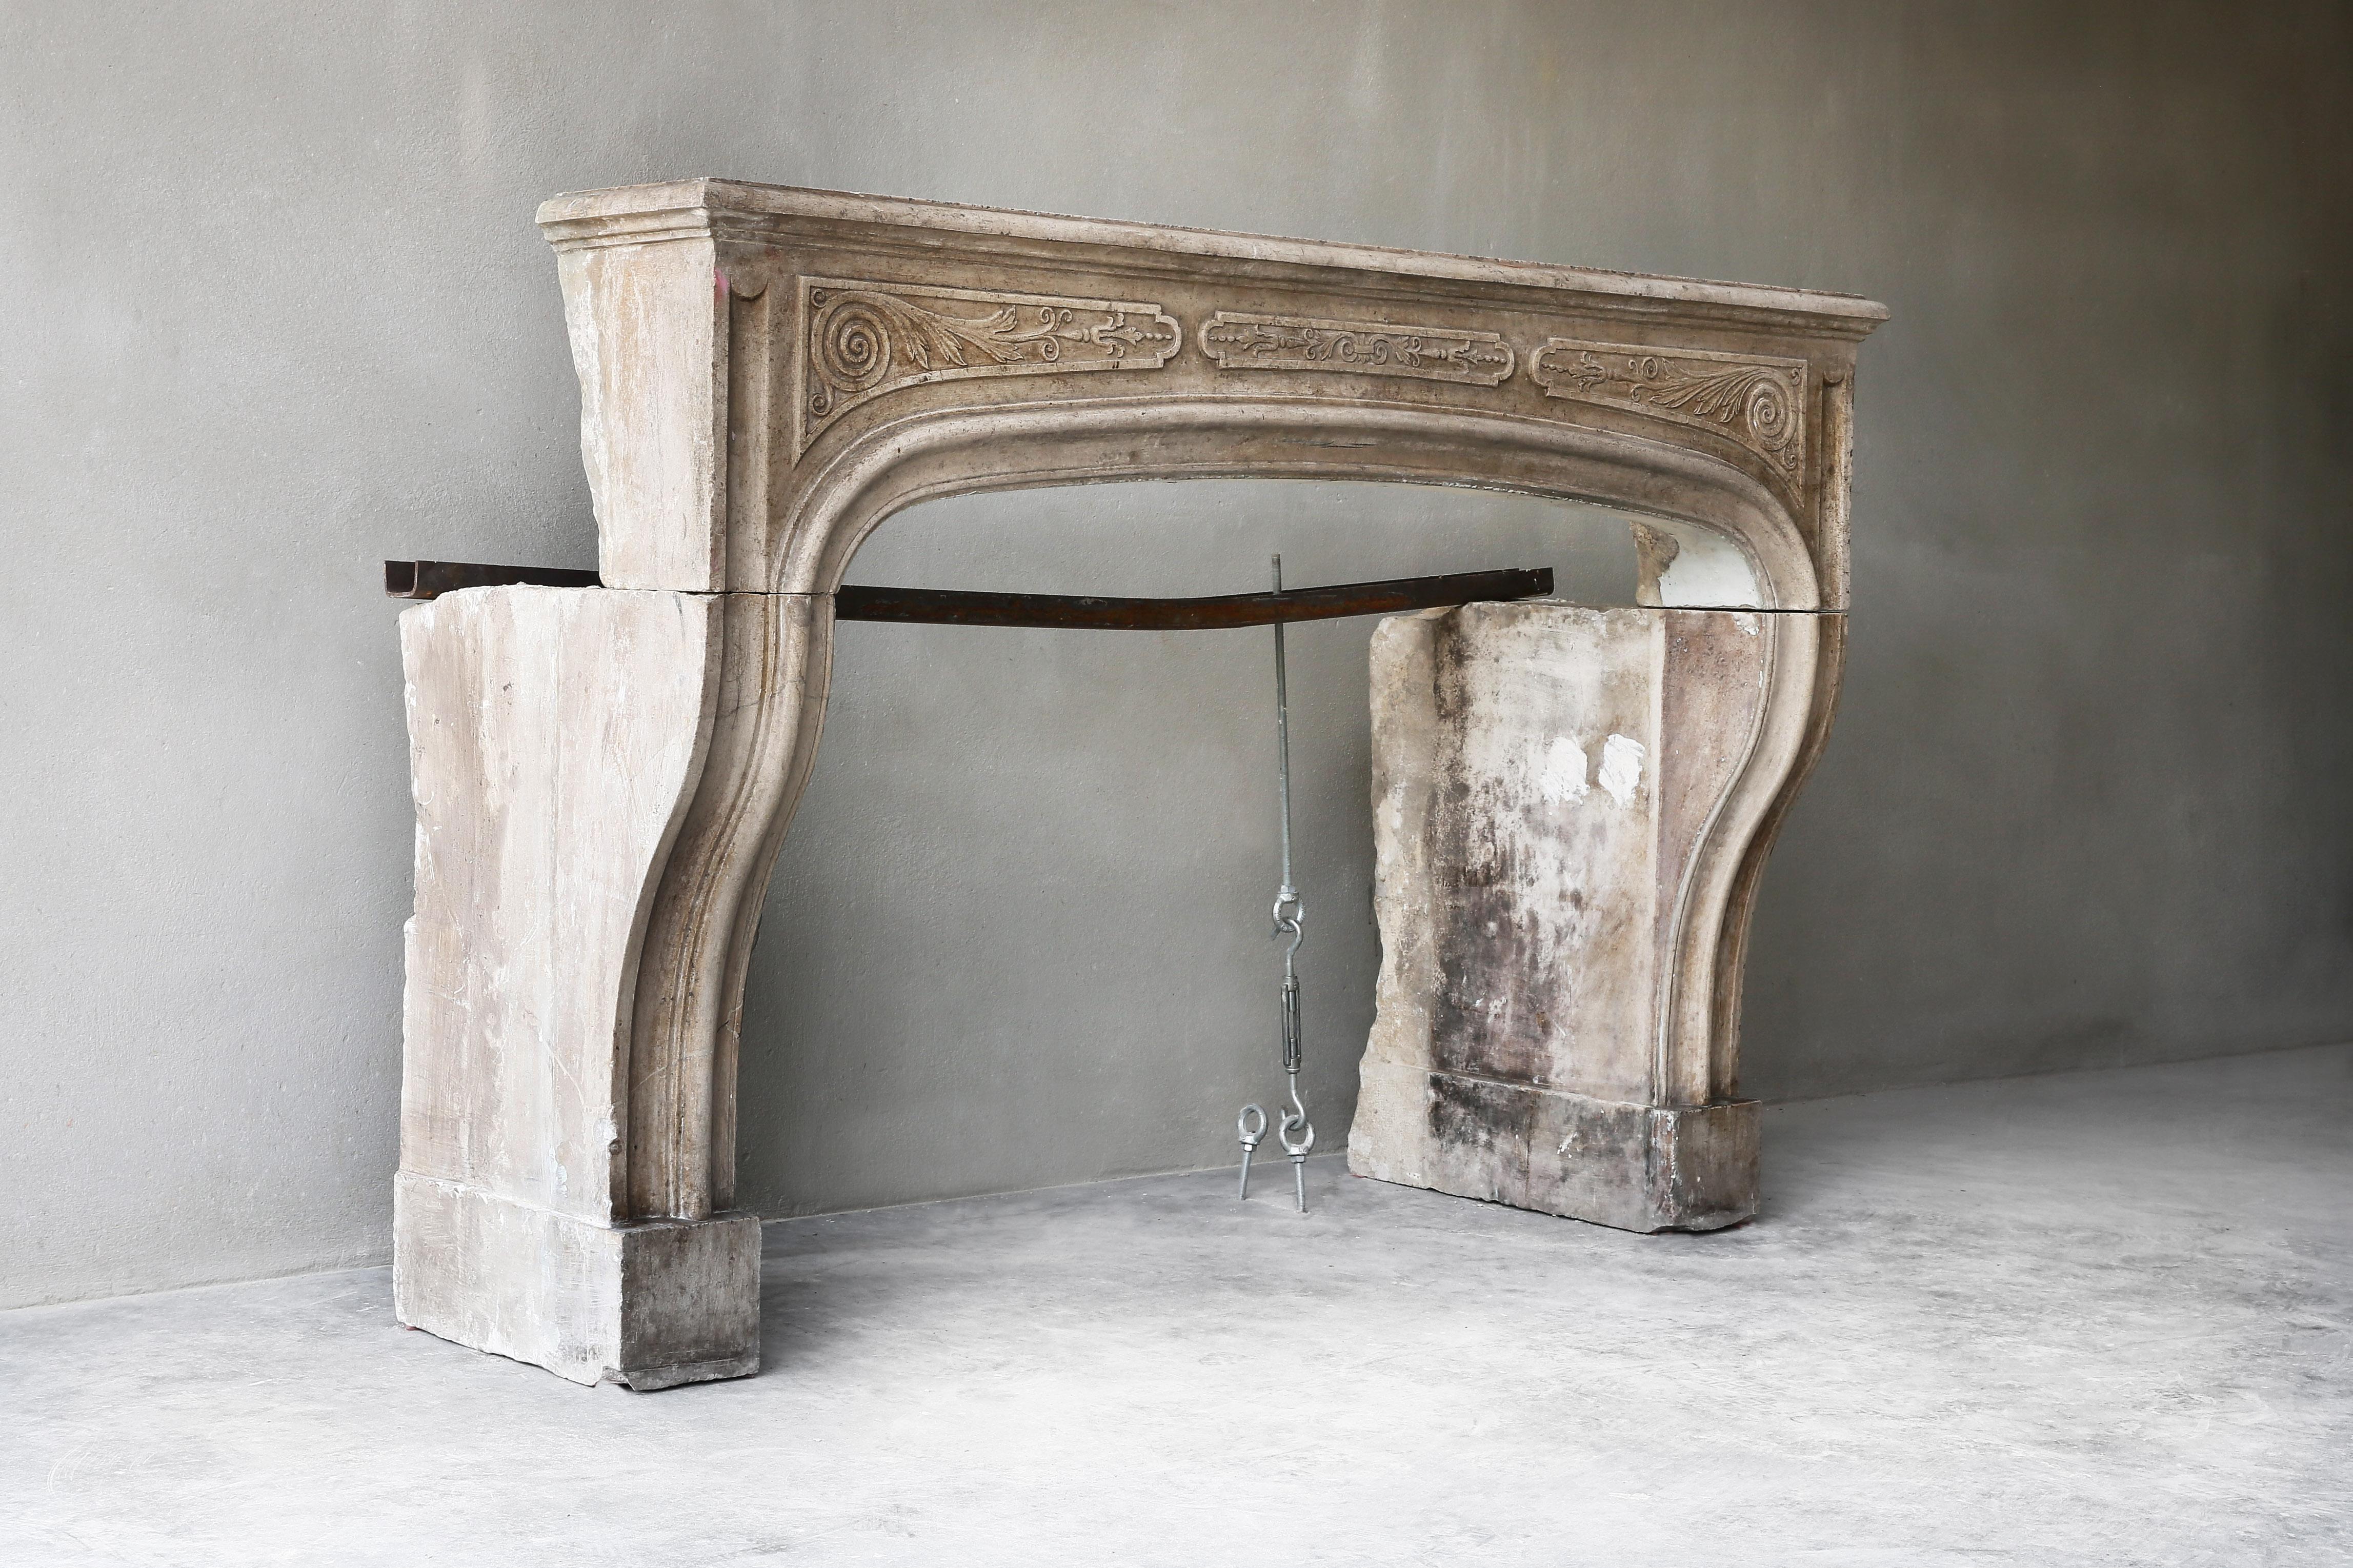 Beautiful elegant antique fireplace from the 19th century. A fireplace with character and history! The fireplace is richly decorated with various ornaments in the front section. The curves make the fireplace elegant and stylish. This fireplace is